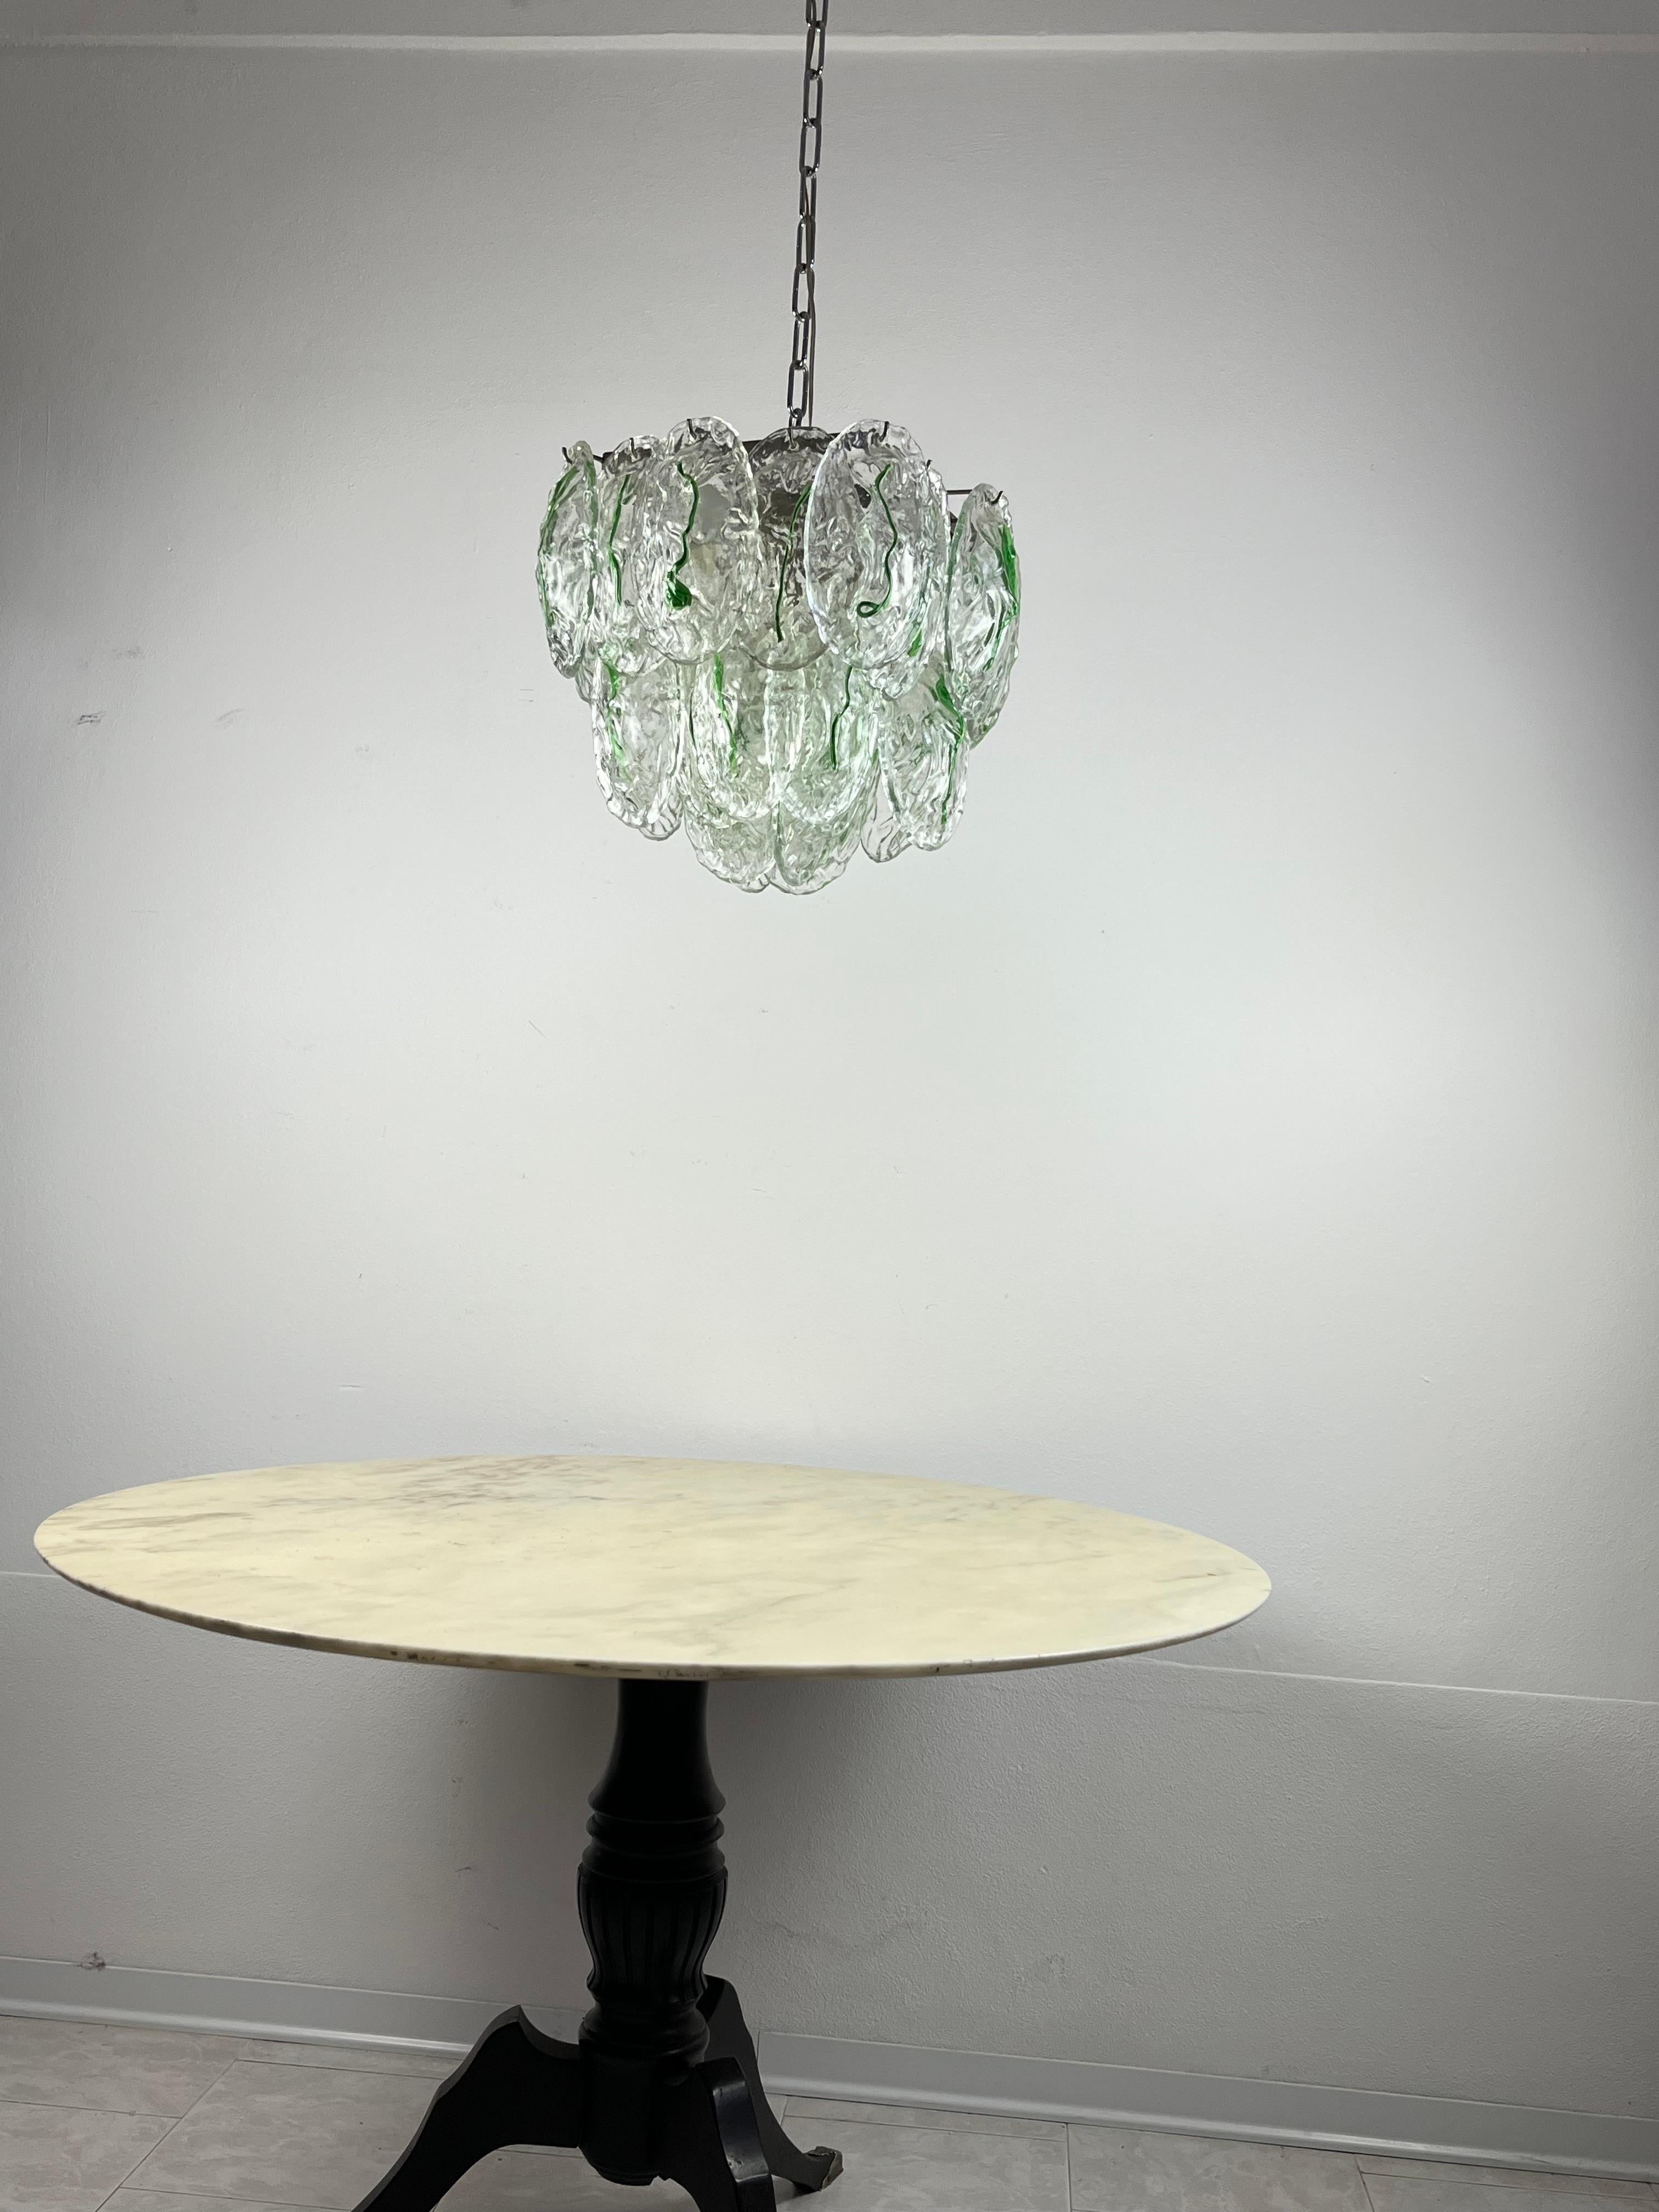 Other Six-light Murano Glass Chandelier by Vistosi Italian Design  1960s For Sale